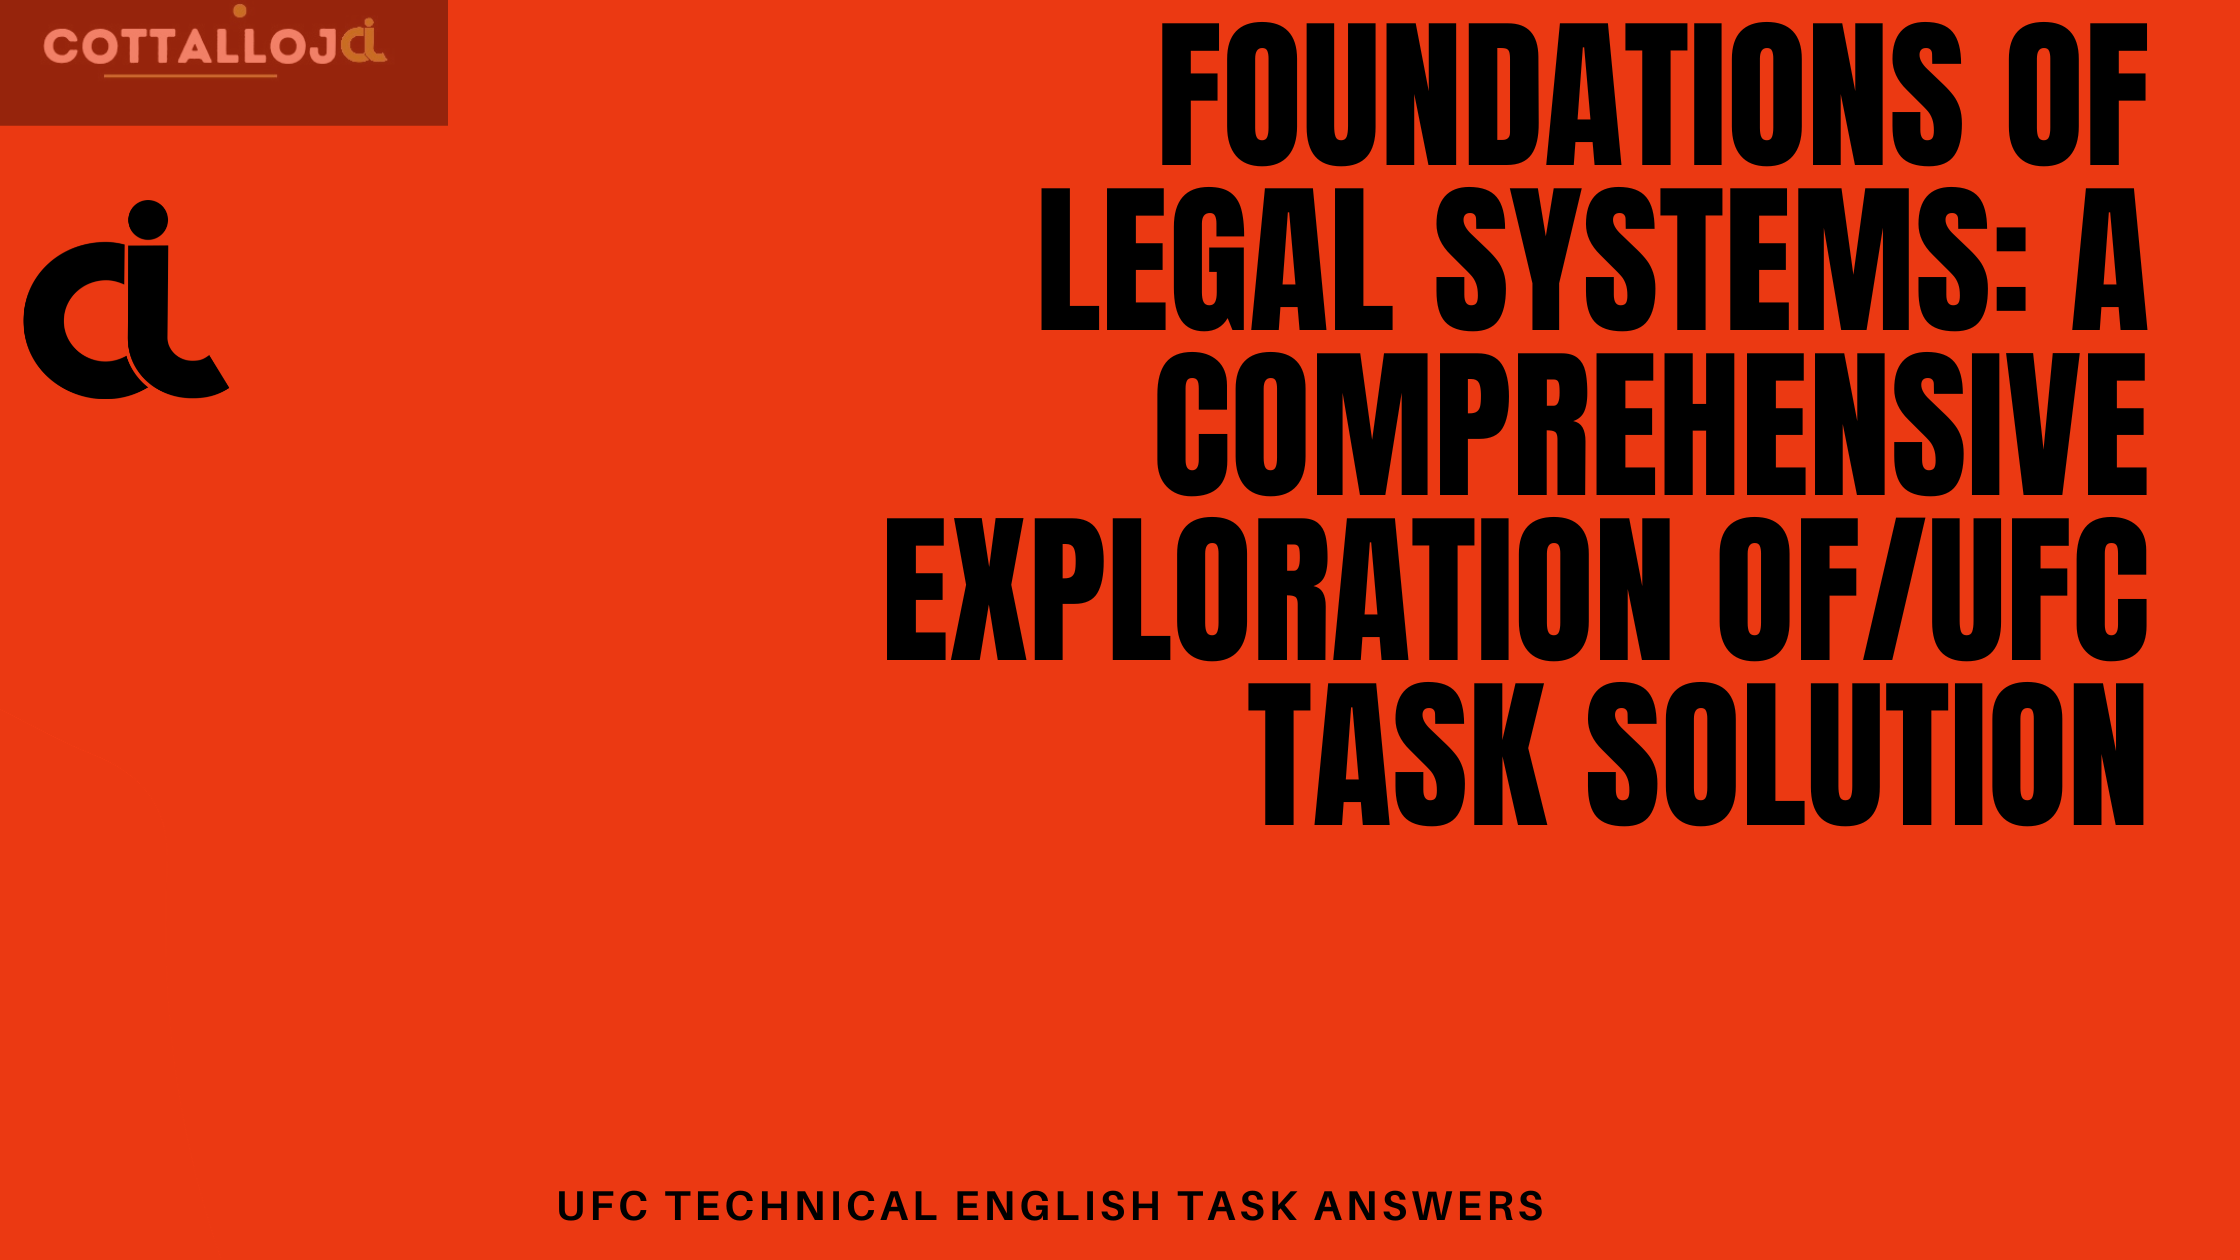 Foundations of Legal Systems: A Comprehensive Exploration of/ufc Task Solution